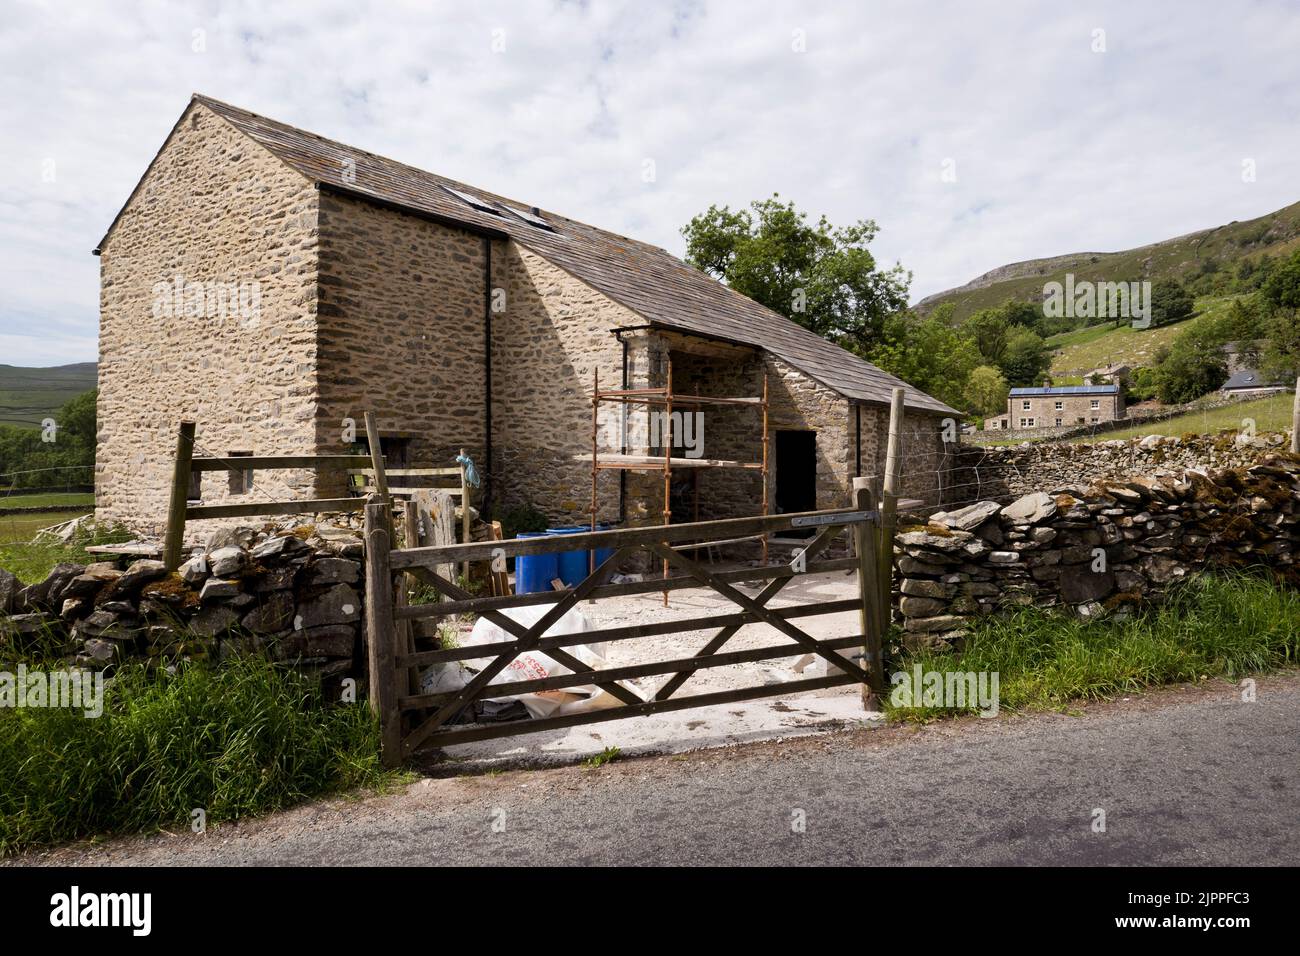 A traditional Yorkshire Dales barn in the process of conversion for residential occupation, Wharfe, near Austwick, Yorkshire Dales National Park. Stock Photo